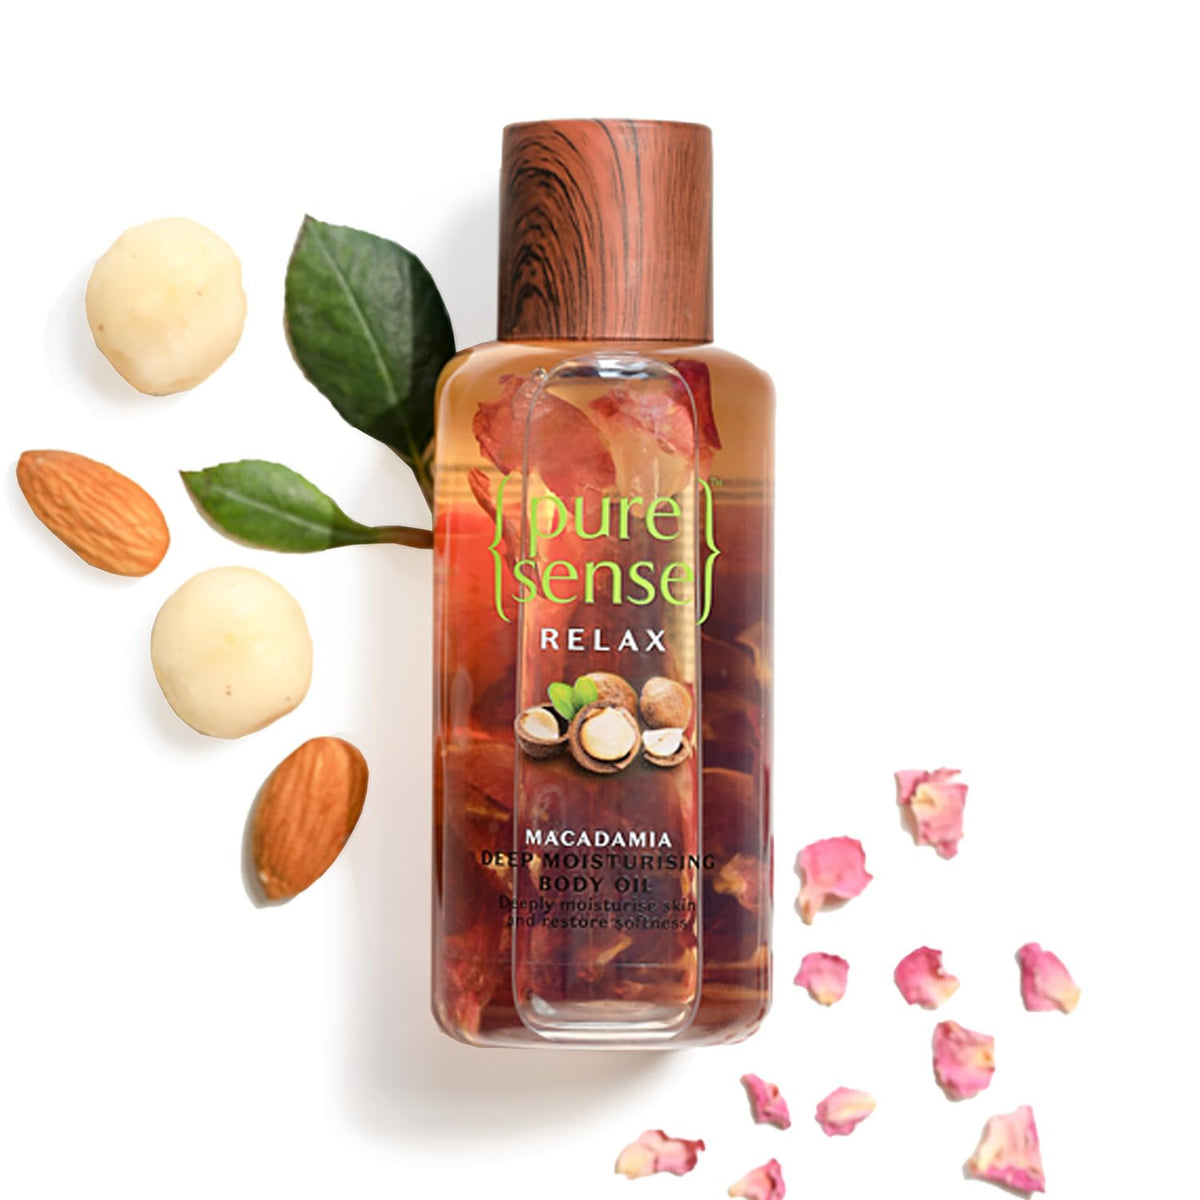 PureSense Macadamia Deep Moisturising Body Oil for All Skin Types with Rich Almond Oil & Rose Petals, Nourishes Skin, Relaxes Senses, Sulphate & Paraben Free, 100 ml